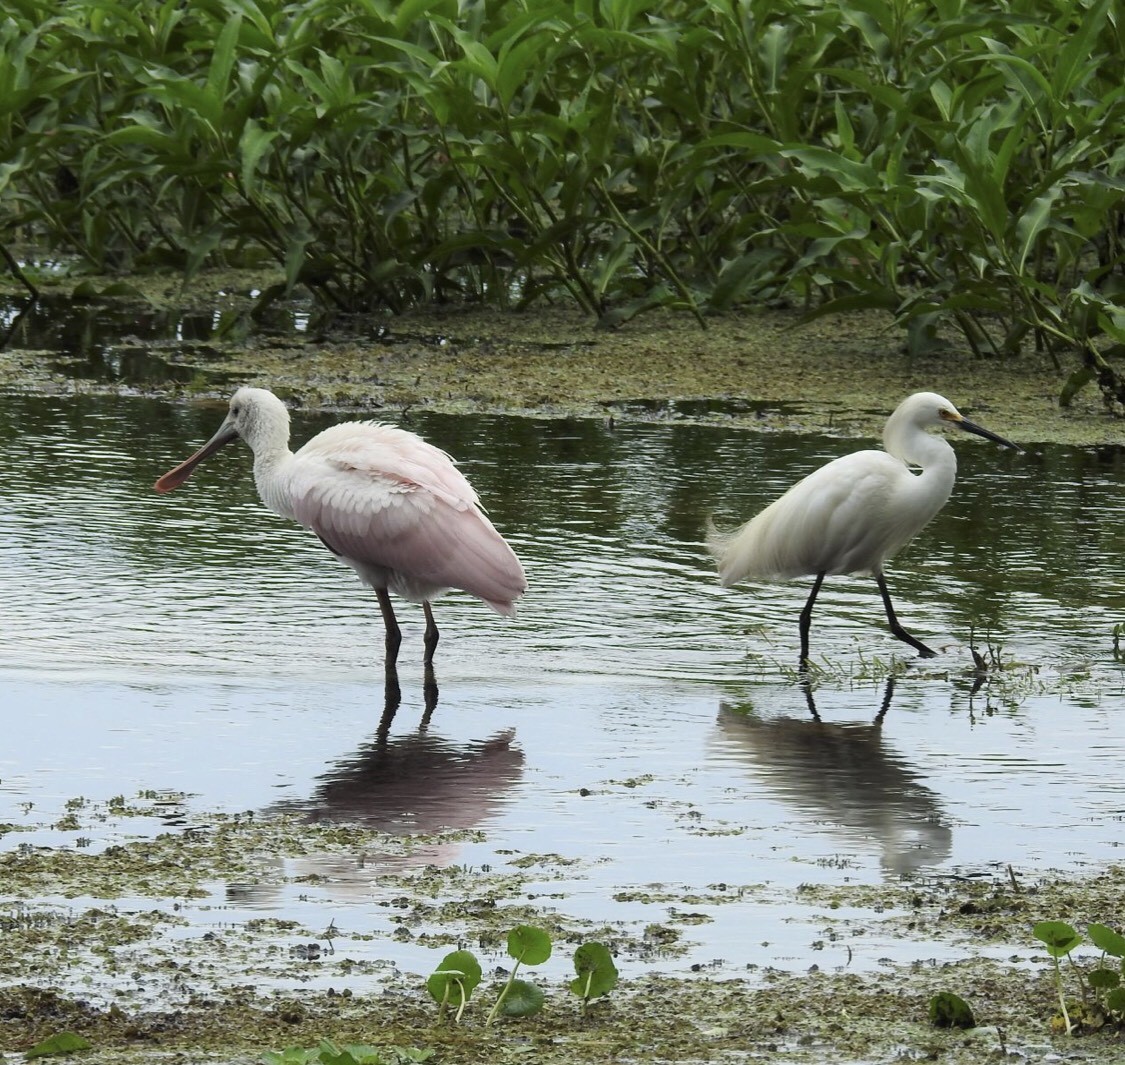 Roseate spoonbill and snowy egret wading in the Withlacoochee River